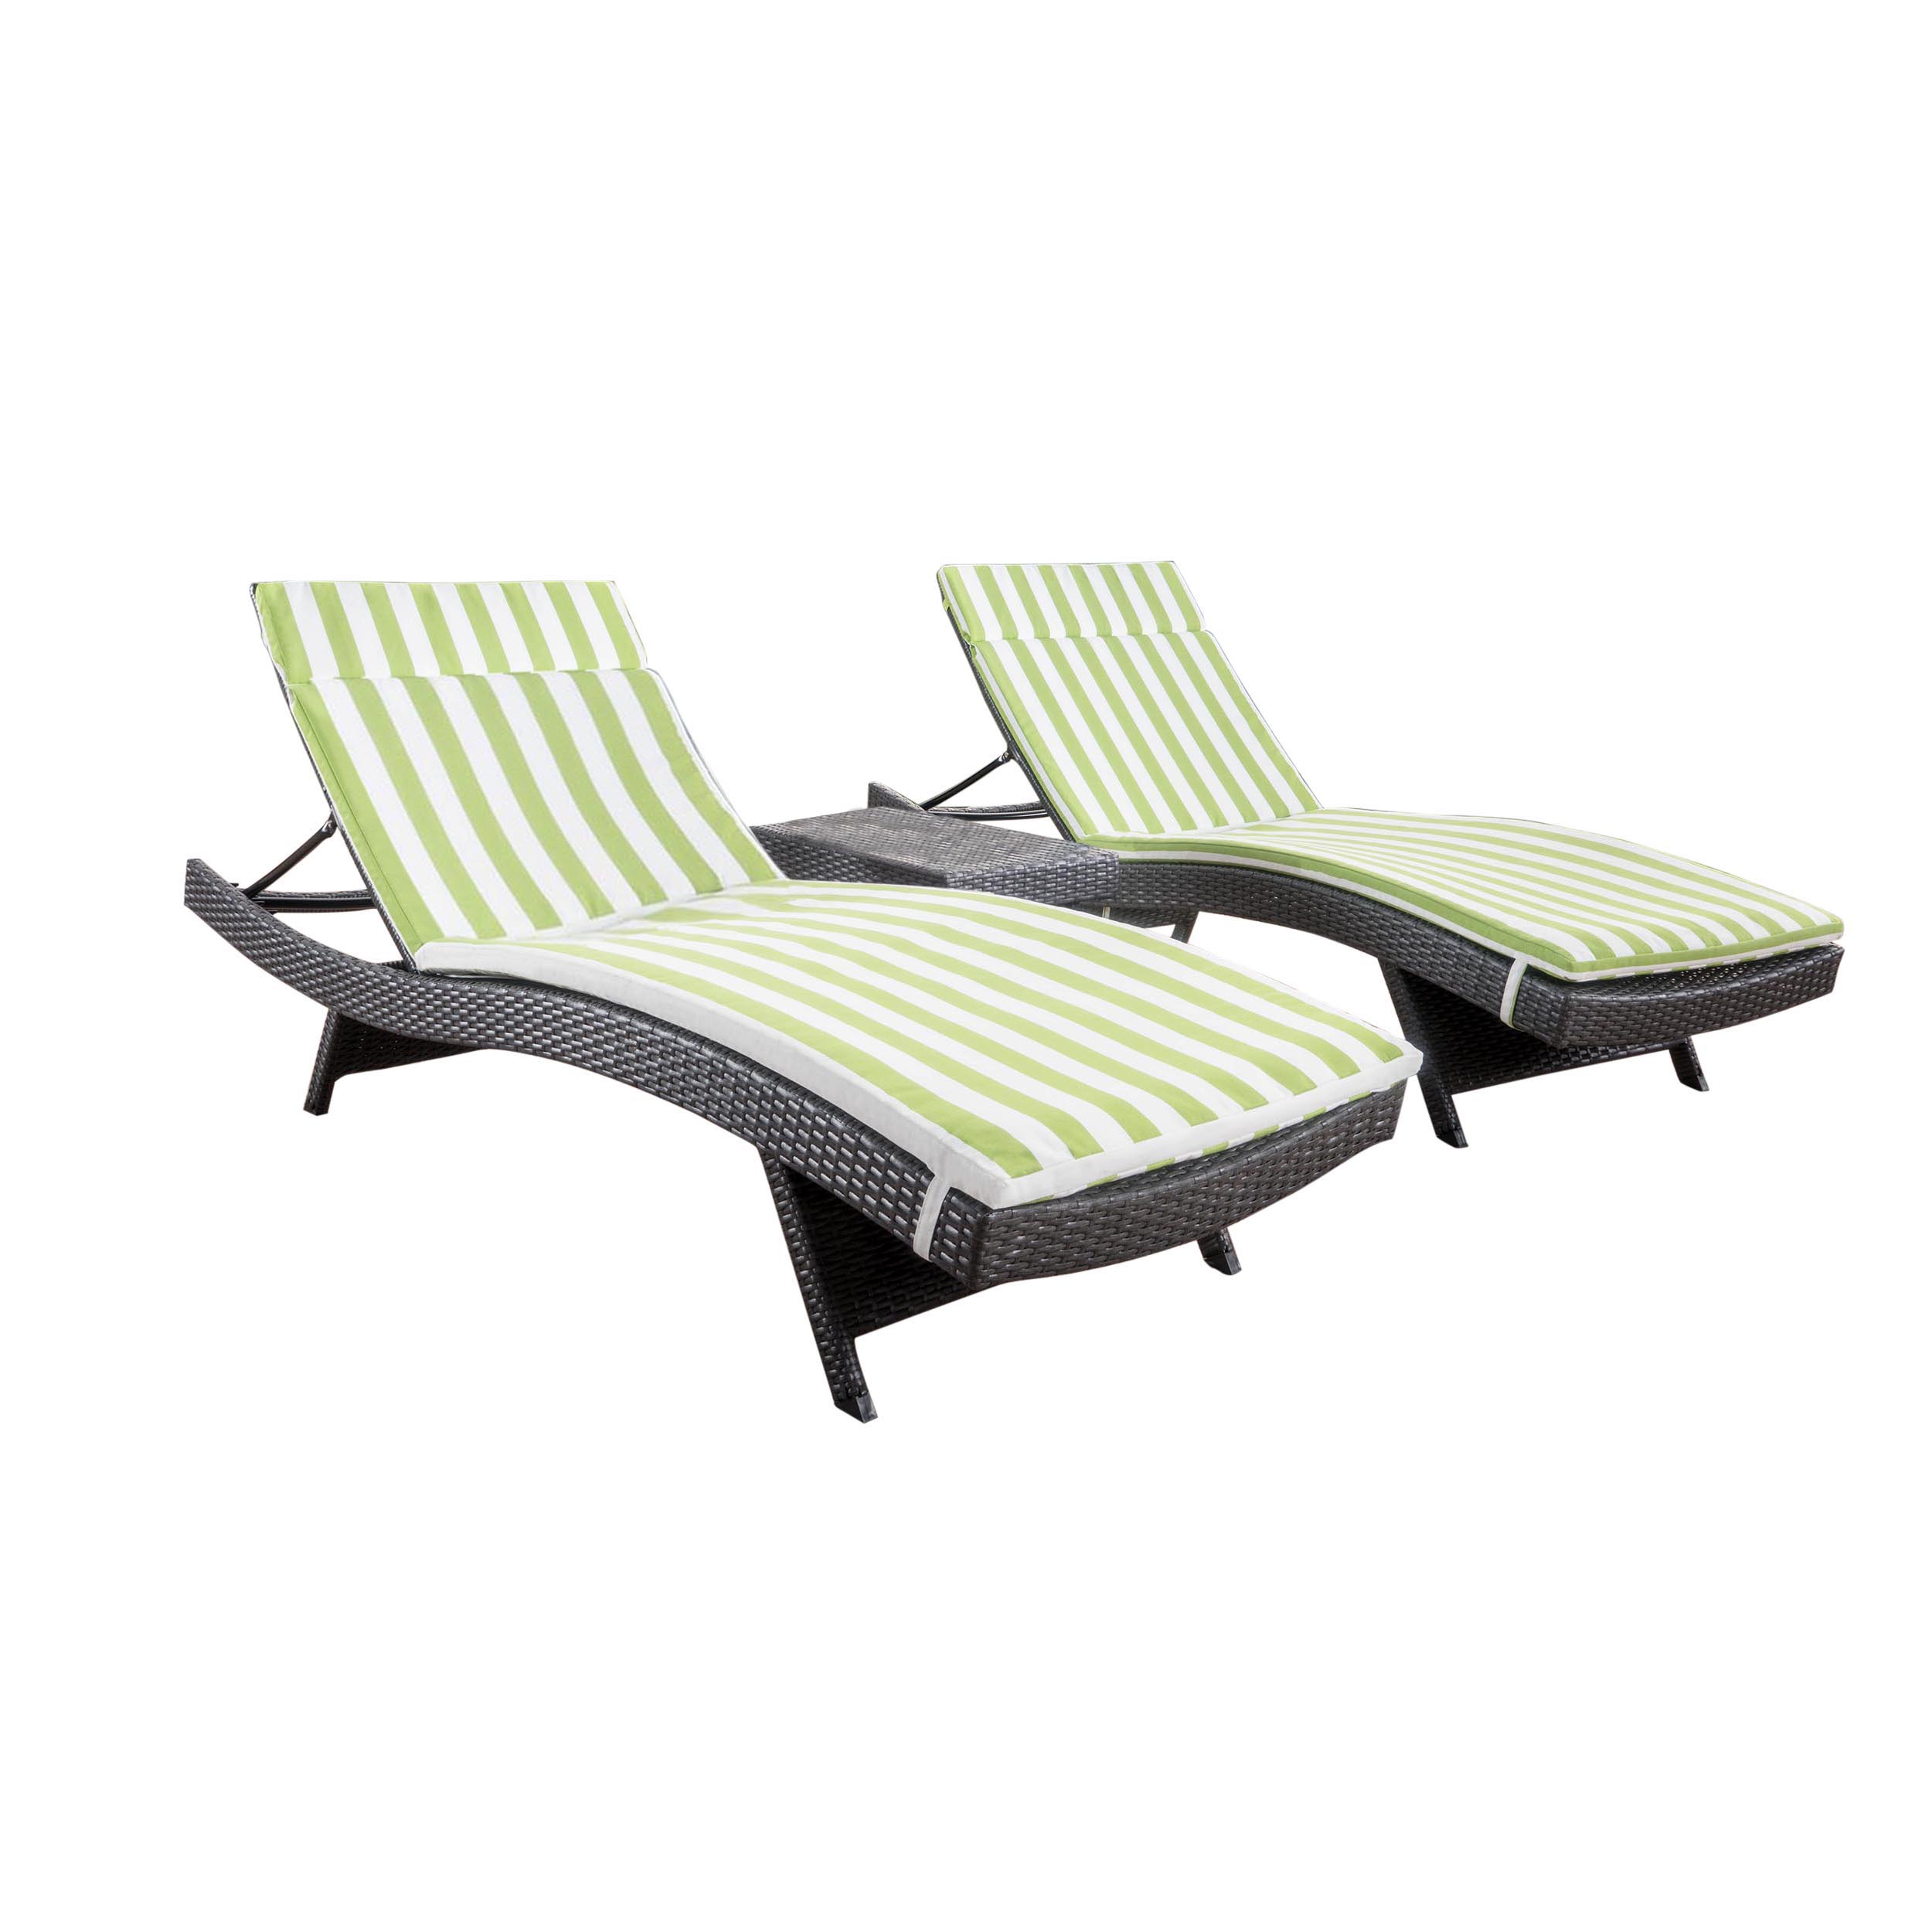 Anthony 3 Piece Outdoor Wicker Lounge with Cushions and Coffee Table, Grey, Green and White Stripe - image 4 of 6